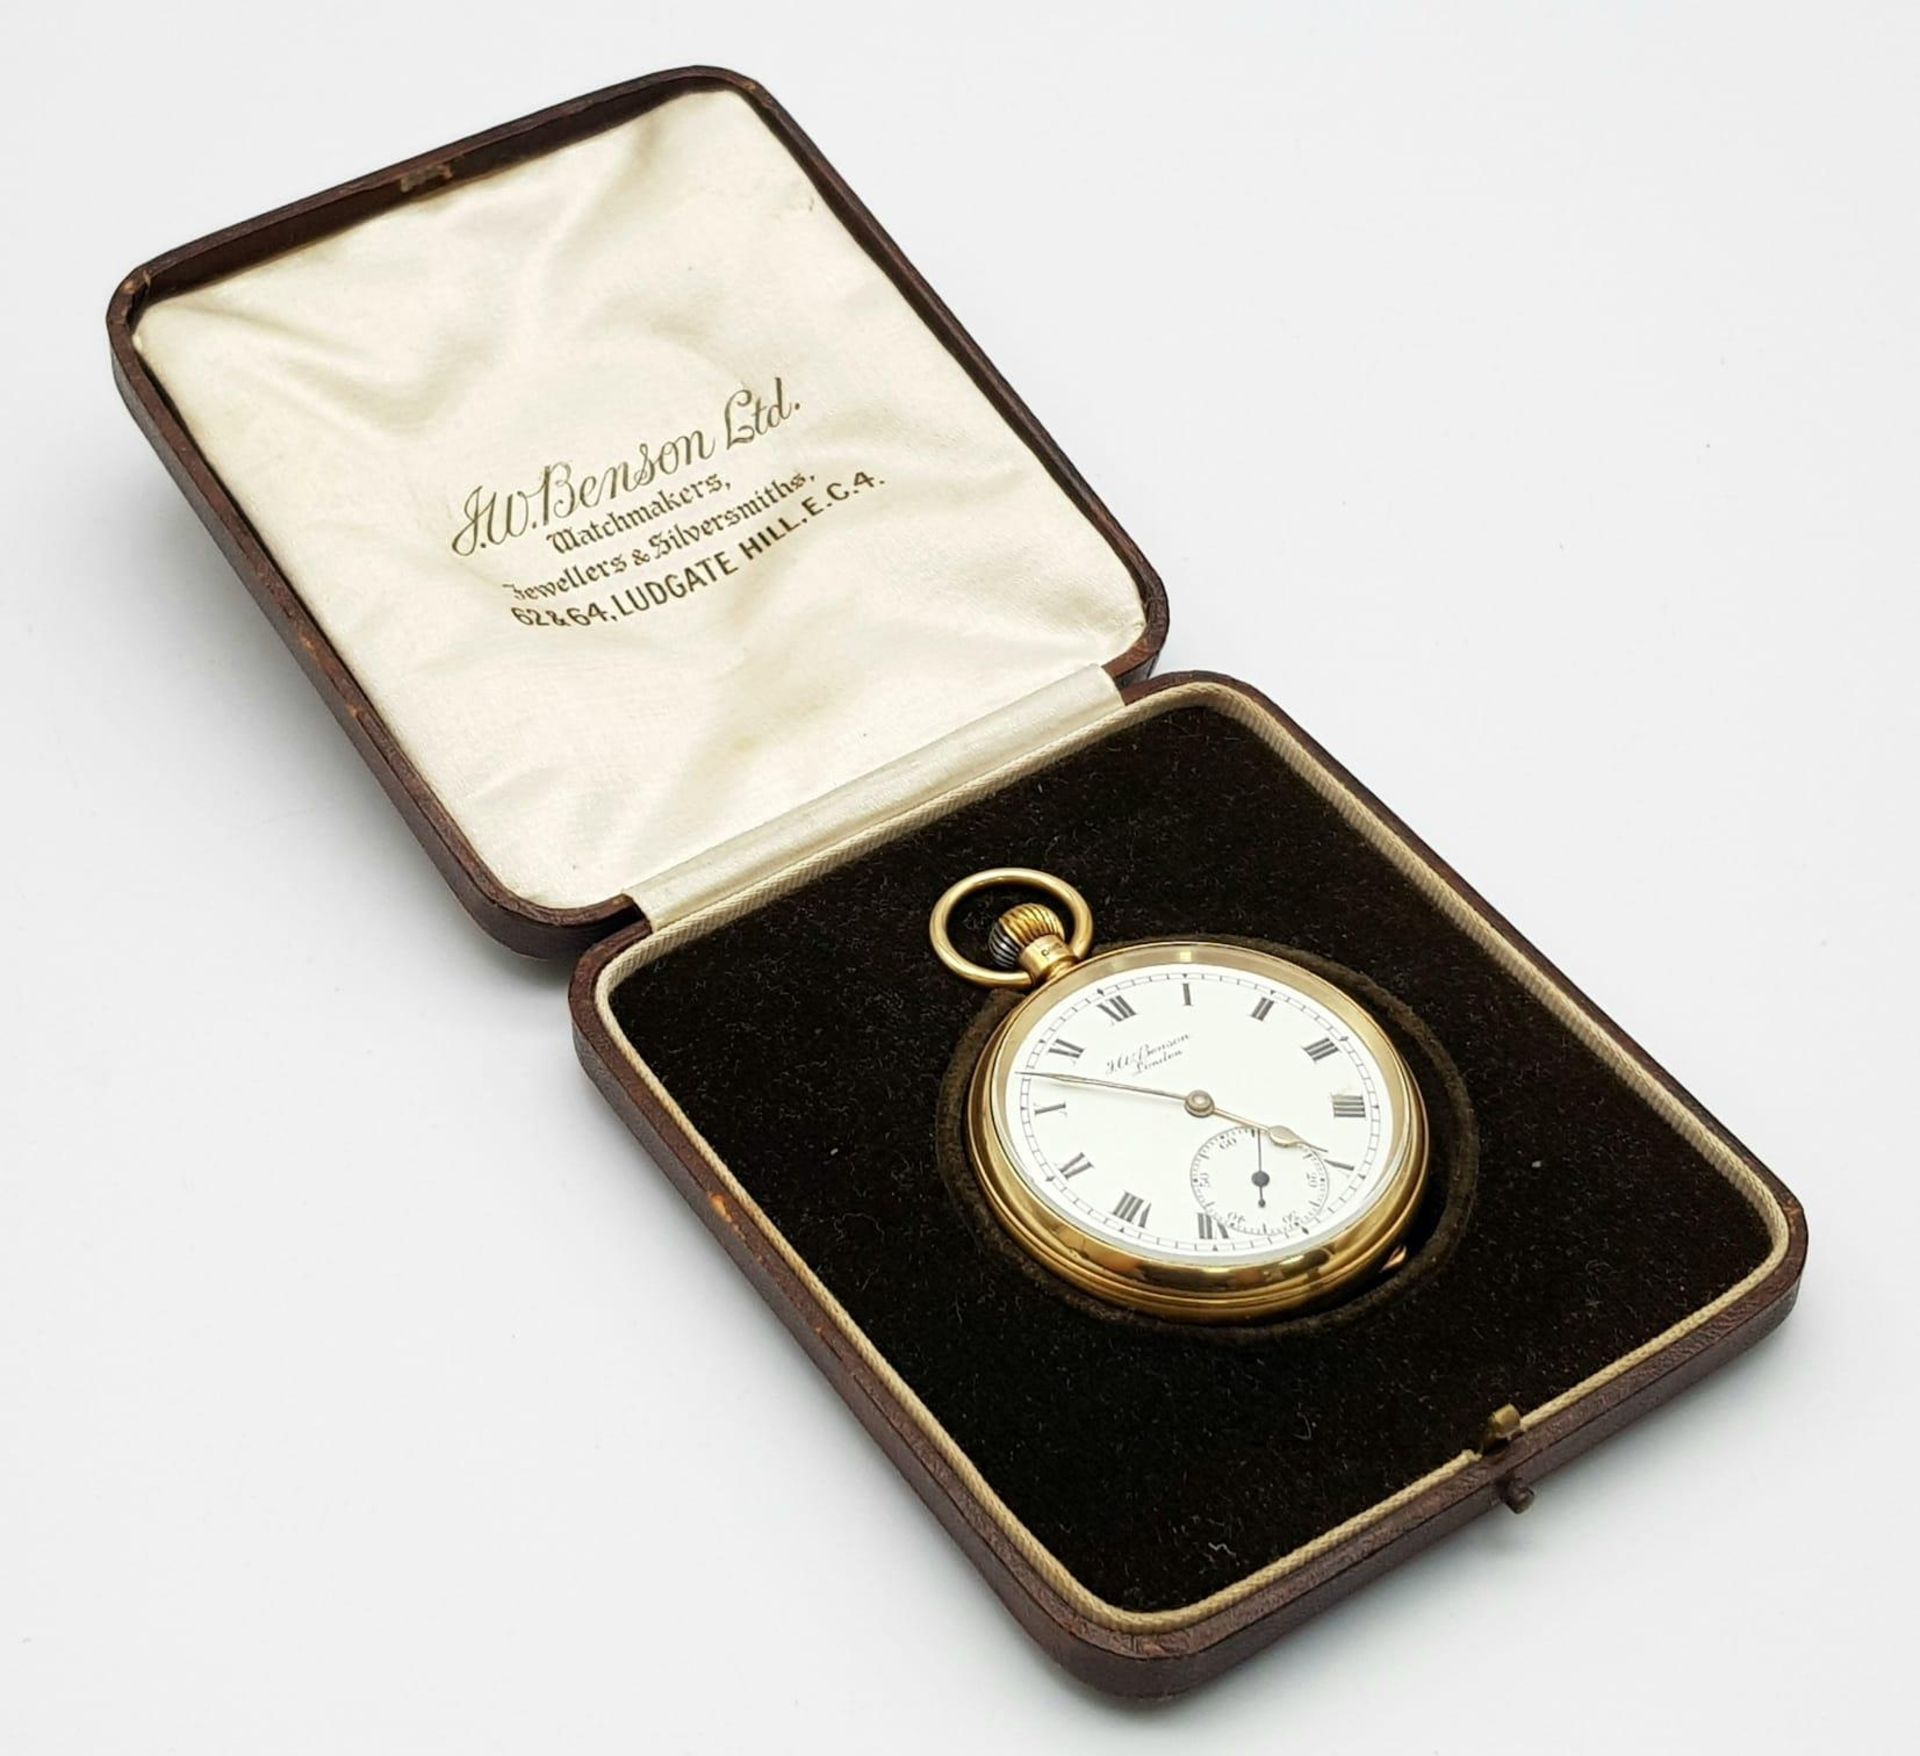 A J.W.BENSON 9K GOLD WATCH DATED 1927 AND BEING IN VERY NICE CONDITION IN ITS ORIGINAL - Image 7 of 9